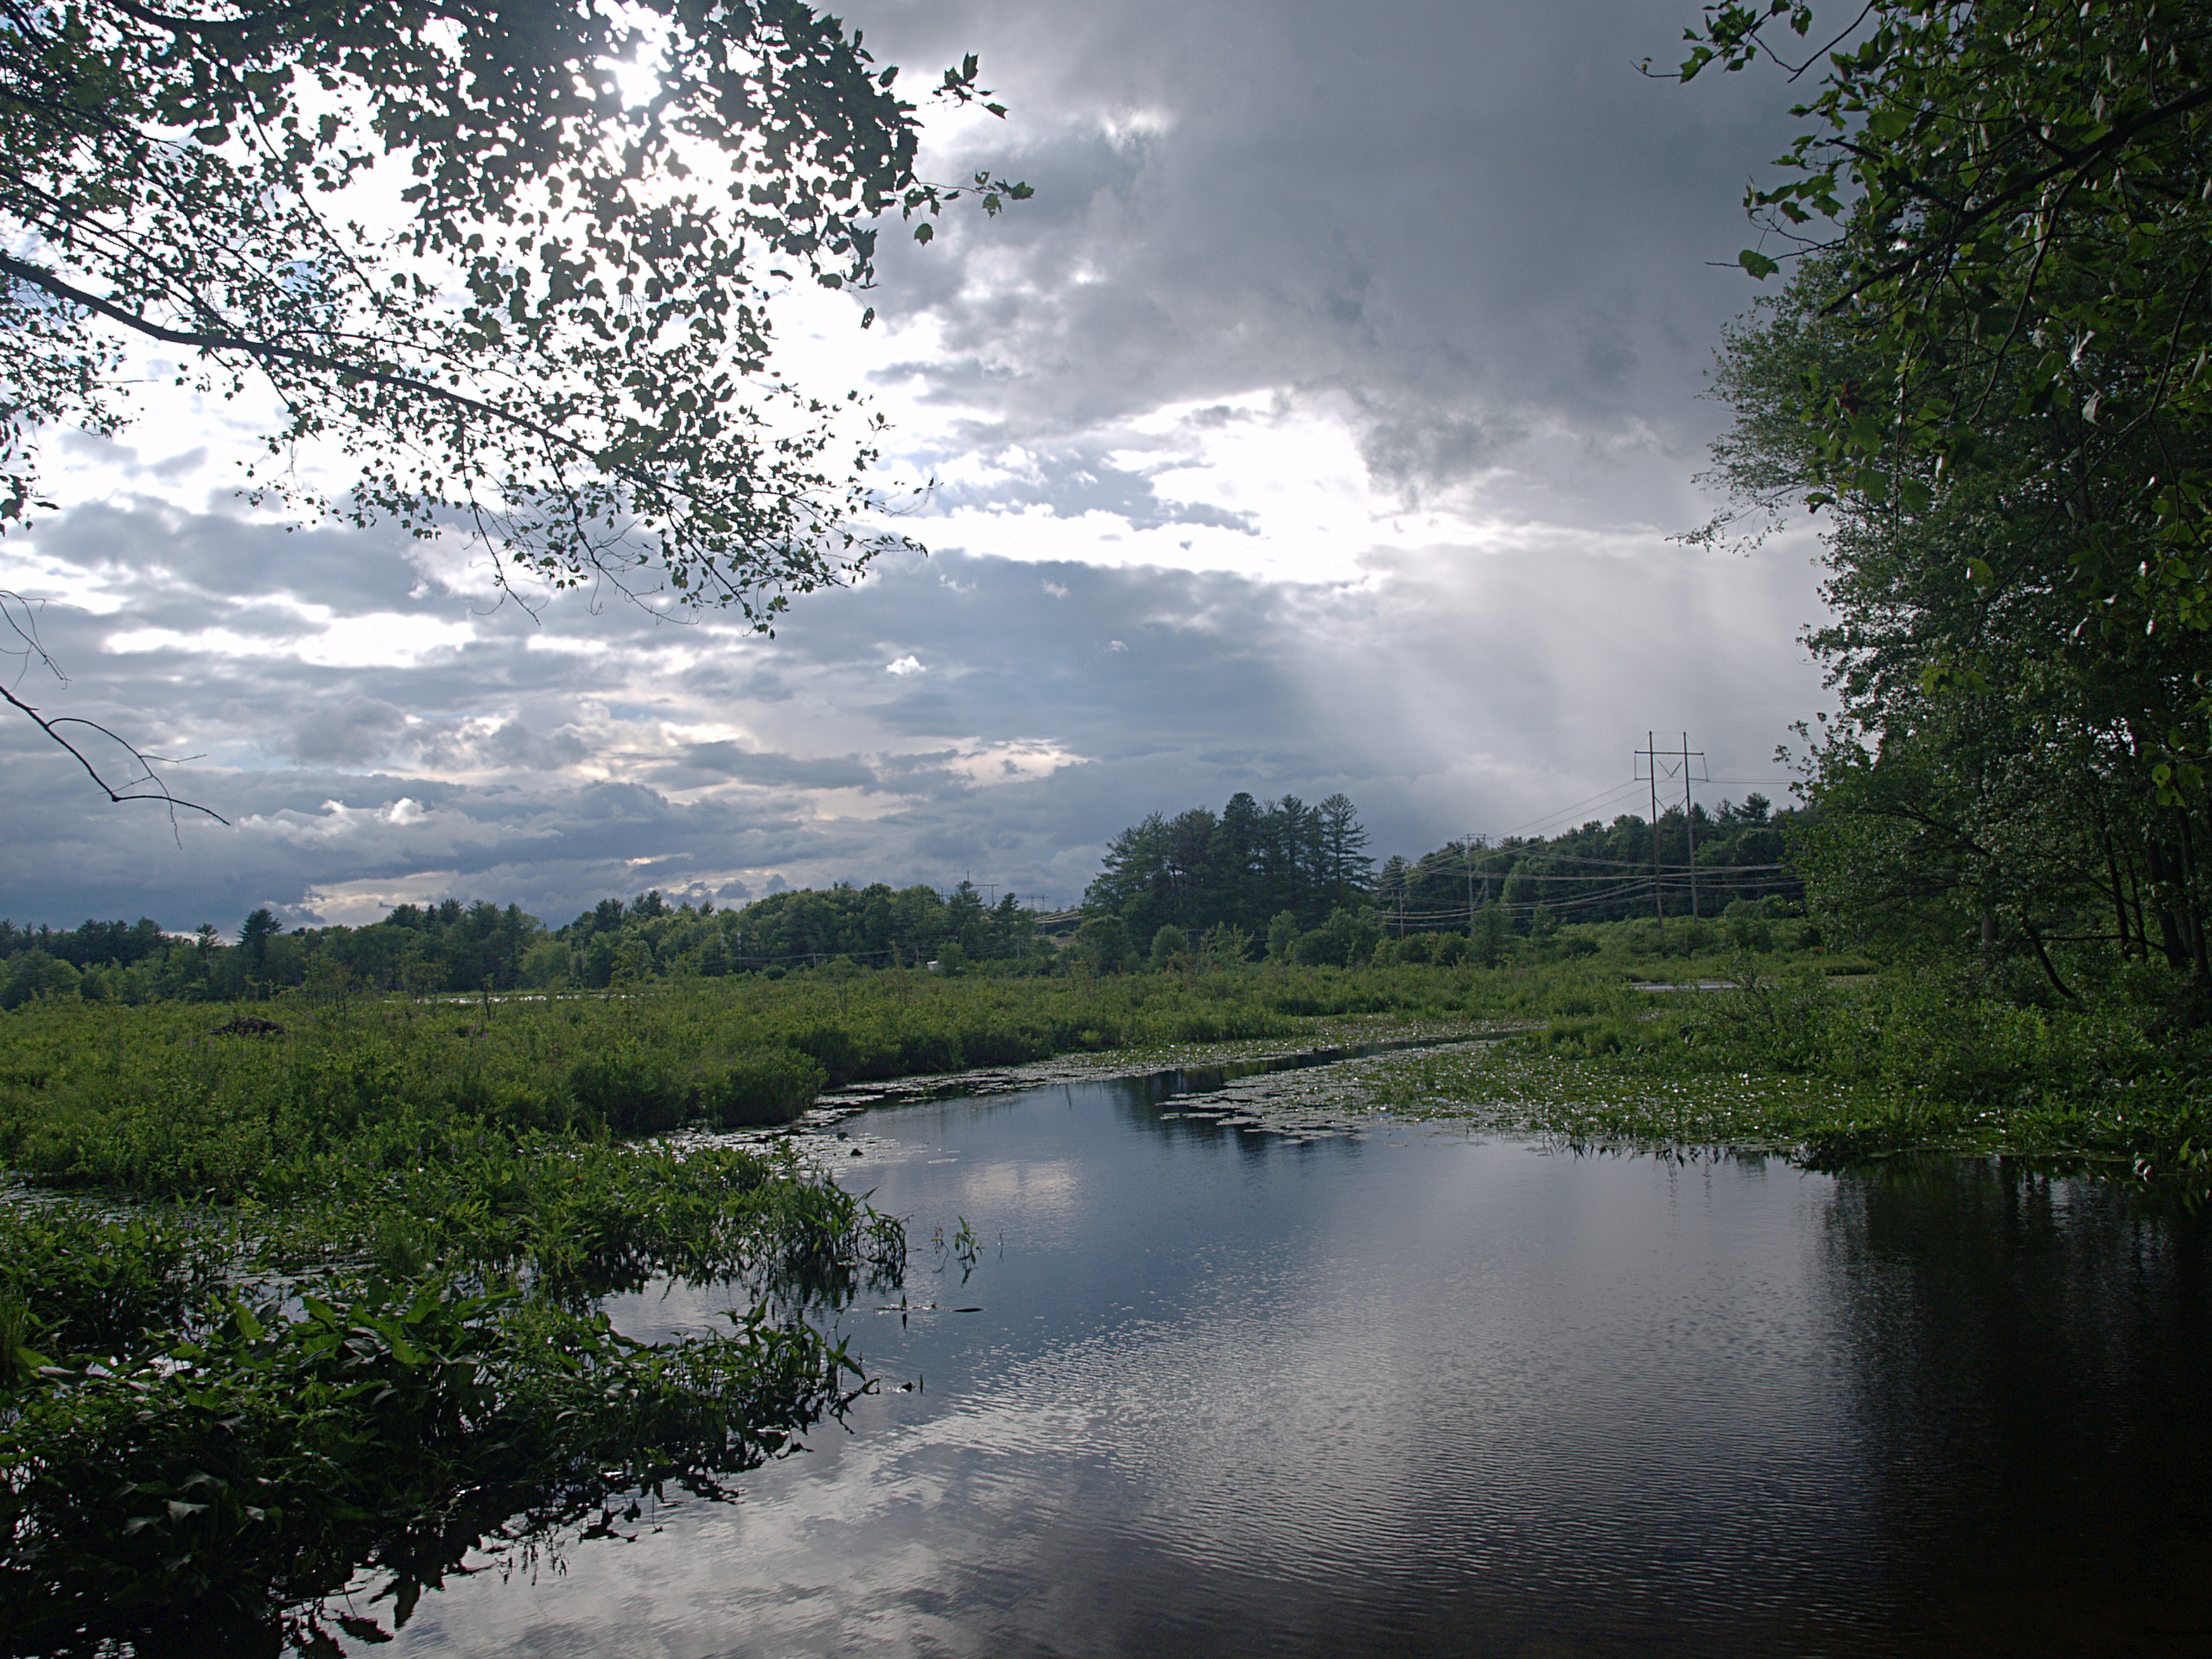 Clouds over Spectacle Pond